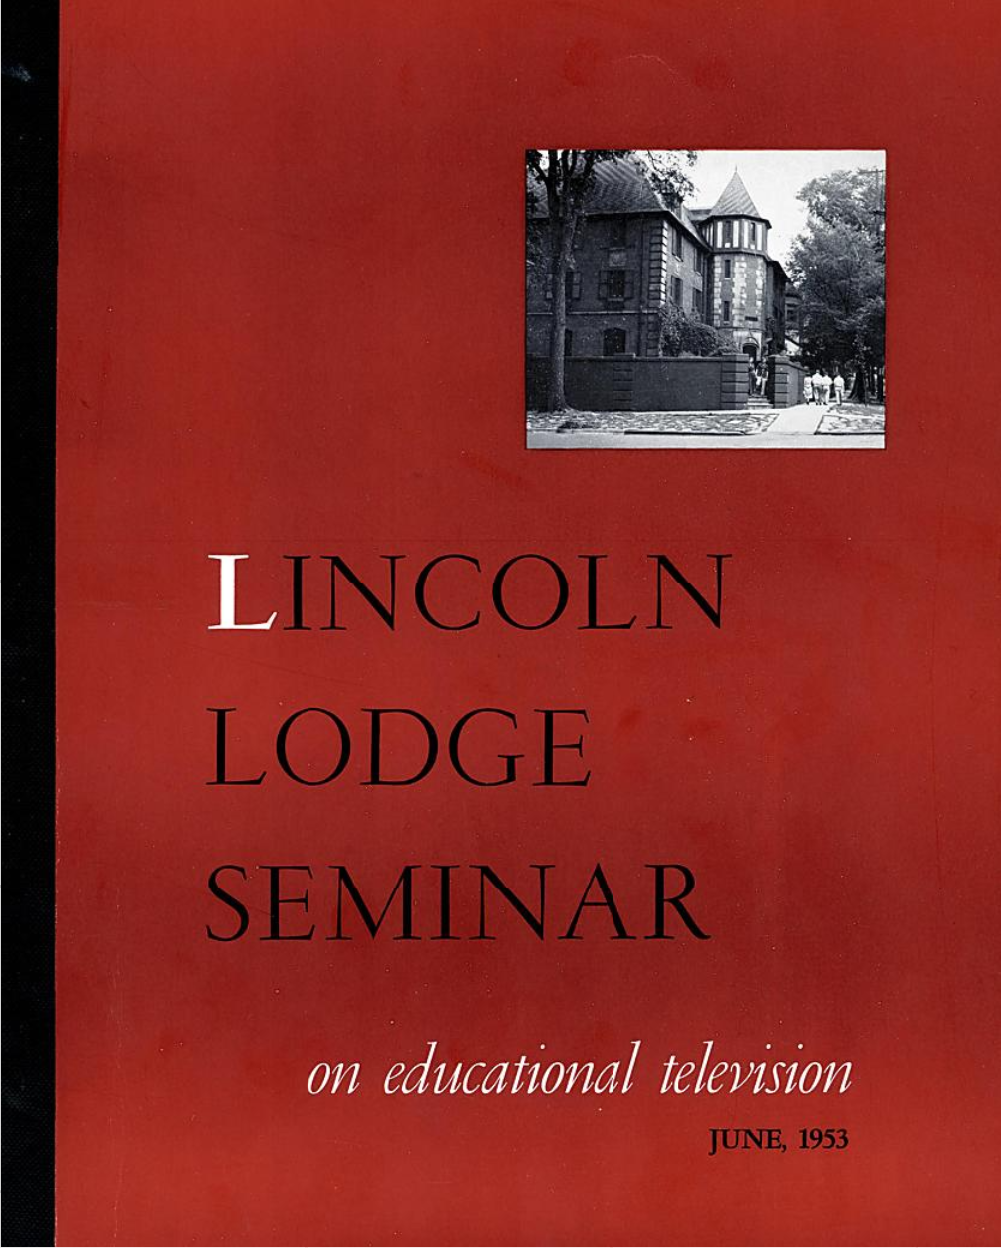 Red cover of the report: Lincoln Lodge Seminar on Educational Television, edited by Burton Paulu